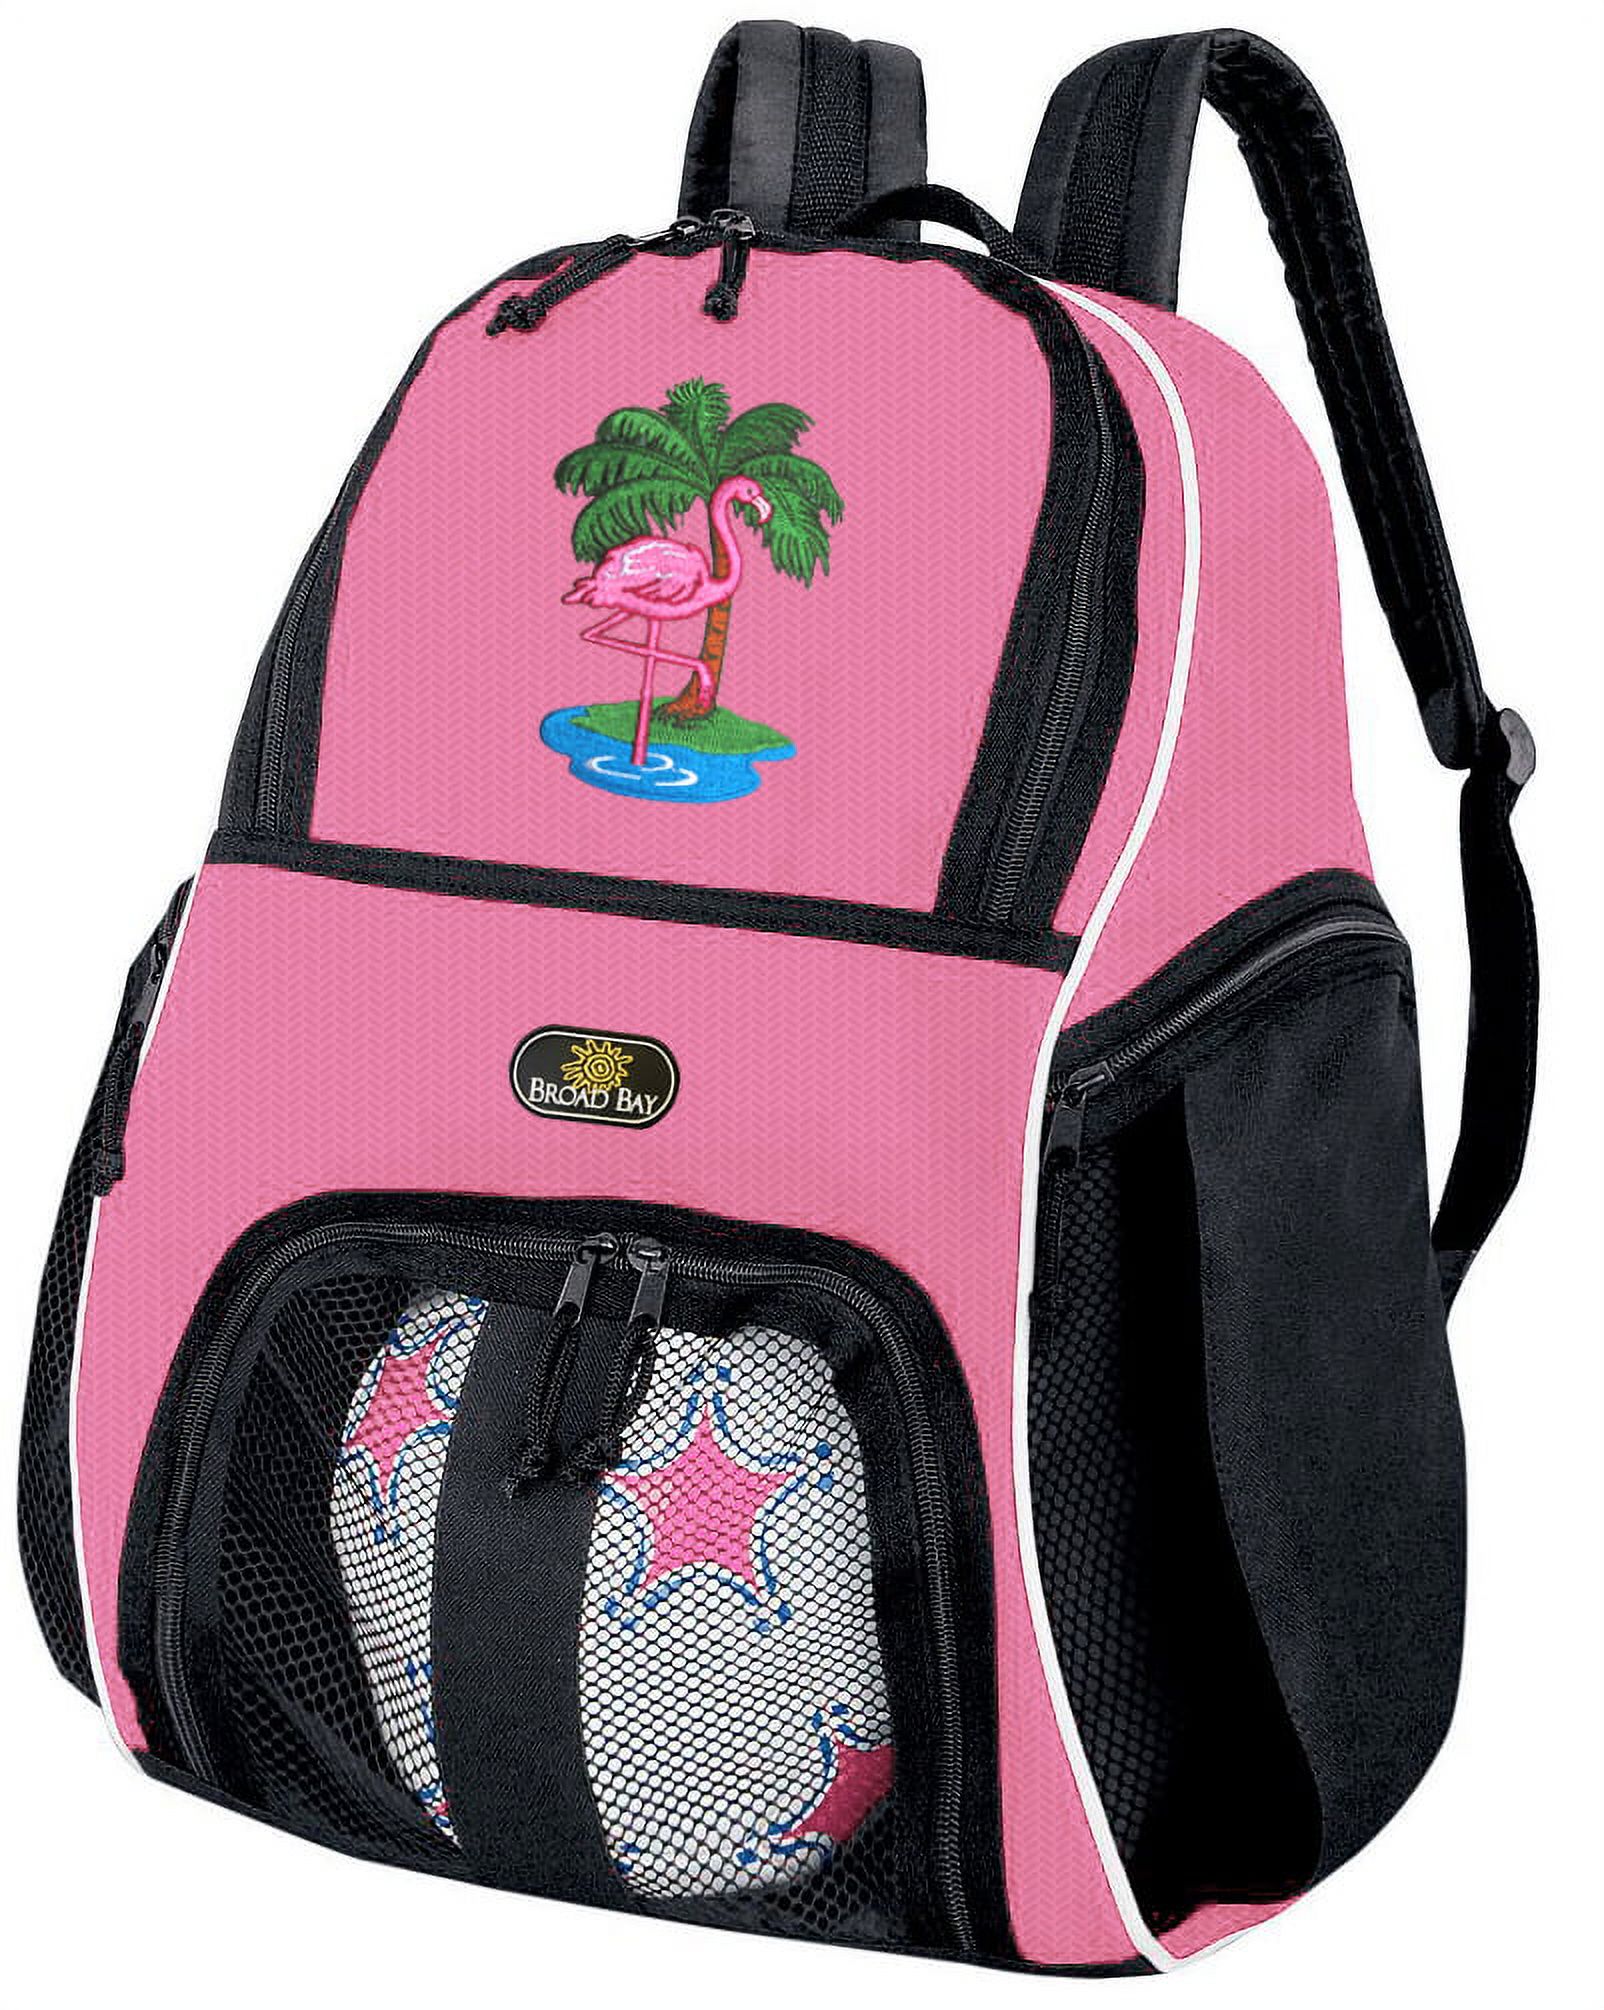 Girls Pink Flamingo Soccer Backpack or Womens Flamingo Volleyball Bag - image 1 of 4